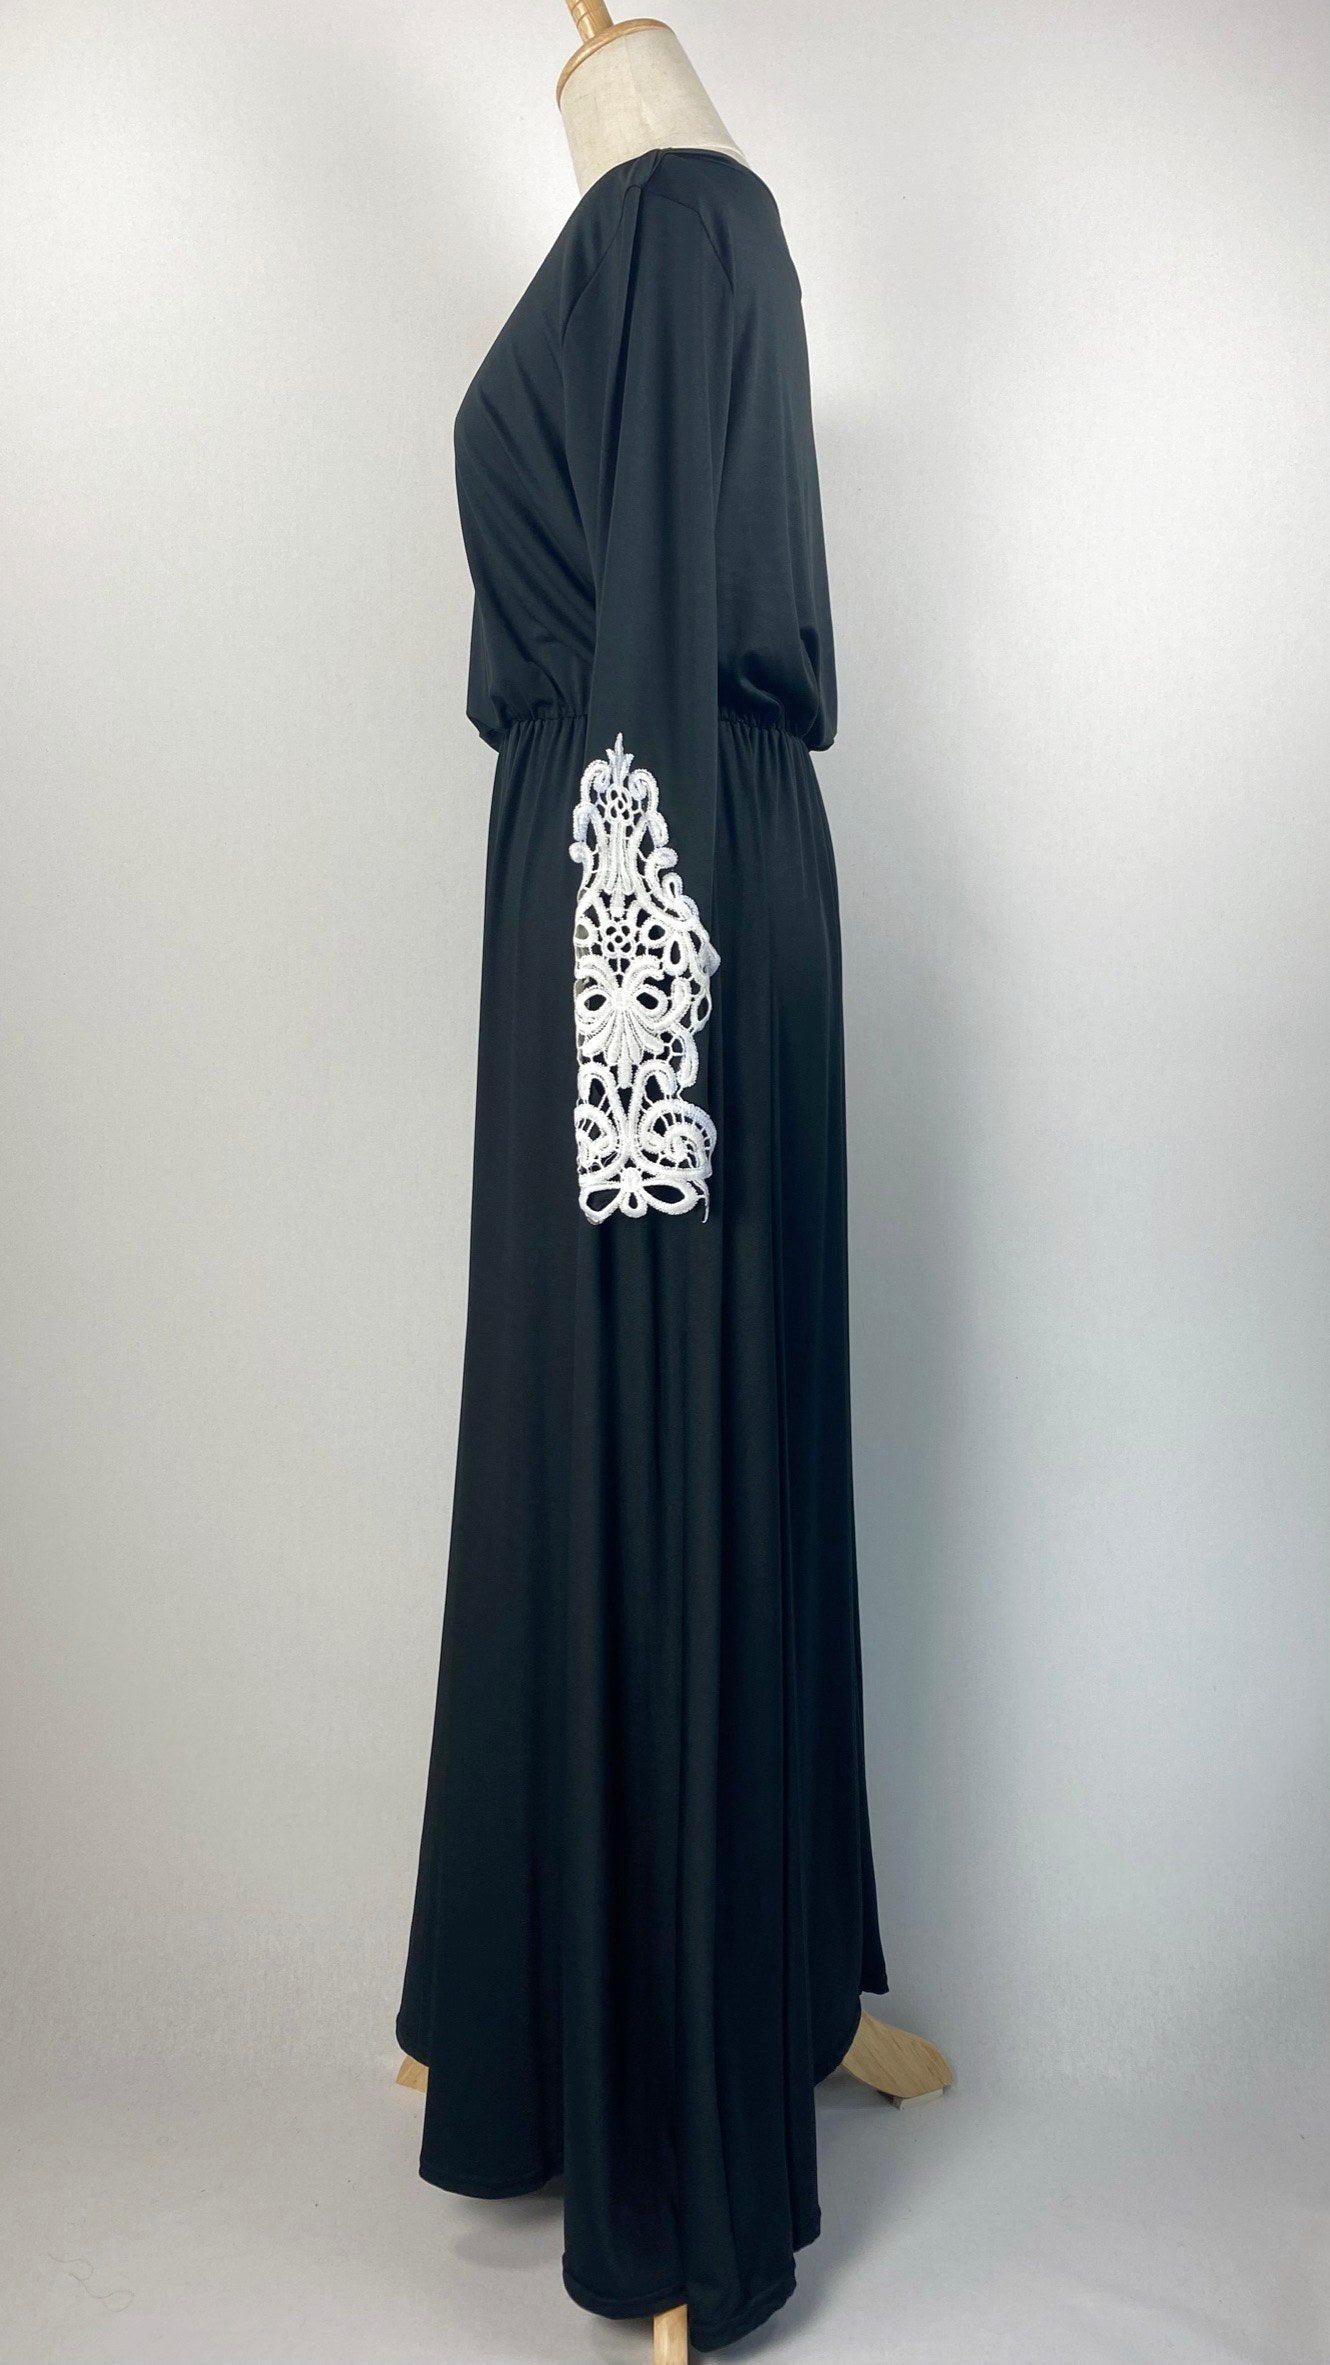 Long Sleeve Maxi Dress with Trim on Sleeves, Black